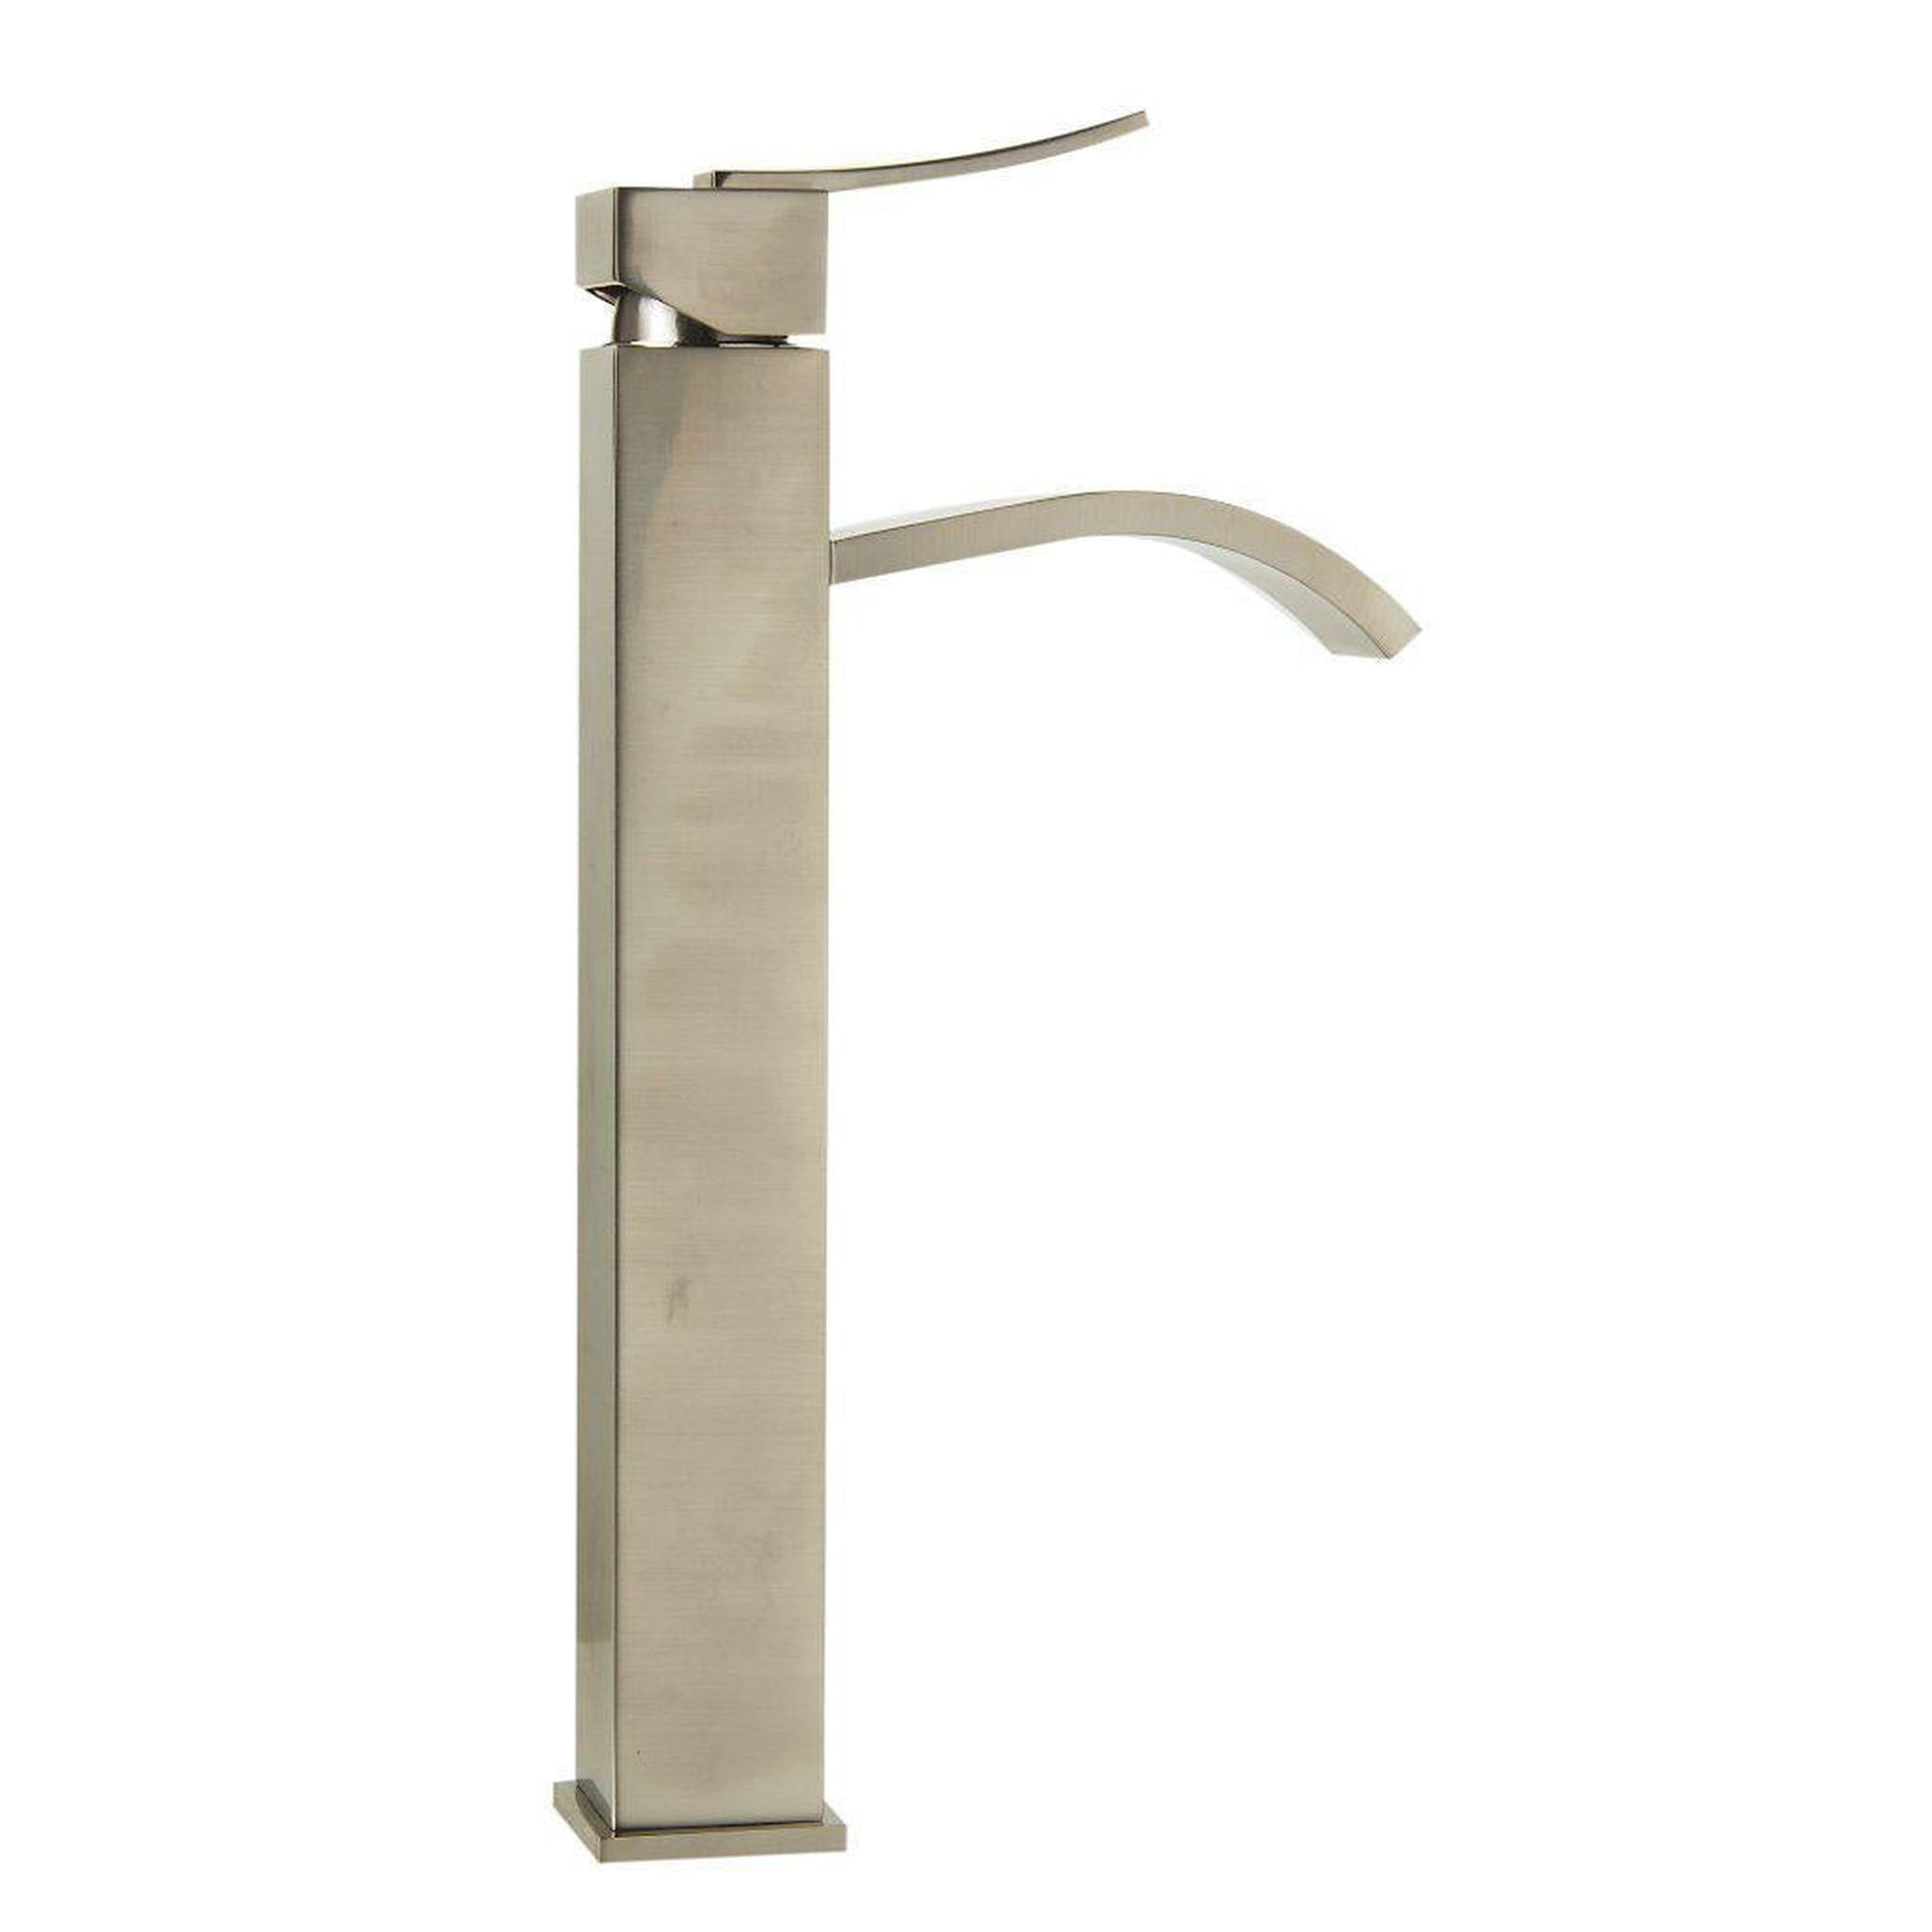 ALFI Brand AB1158-BN Brushed Nickel Vessel Square Body Curved Spout Brass Bathroom Sink Faucet With Single Lever